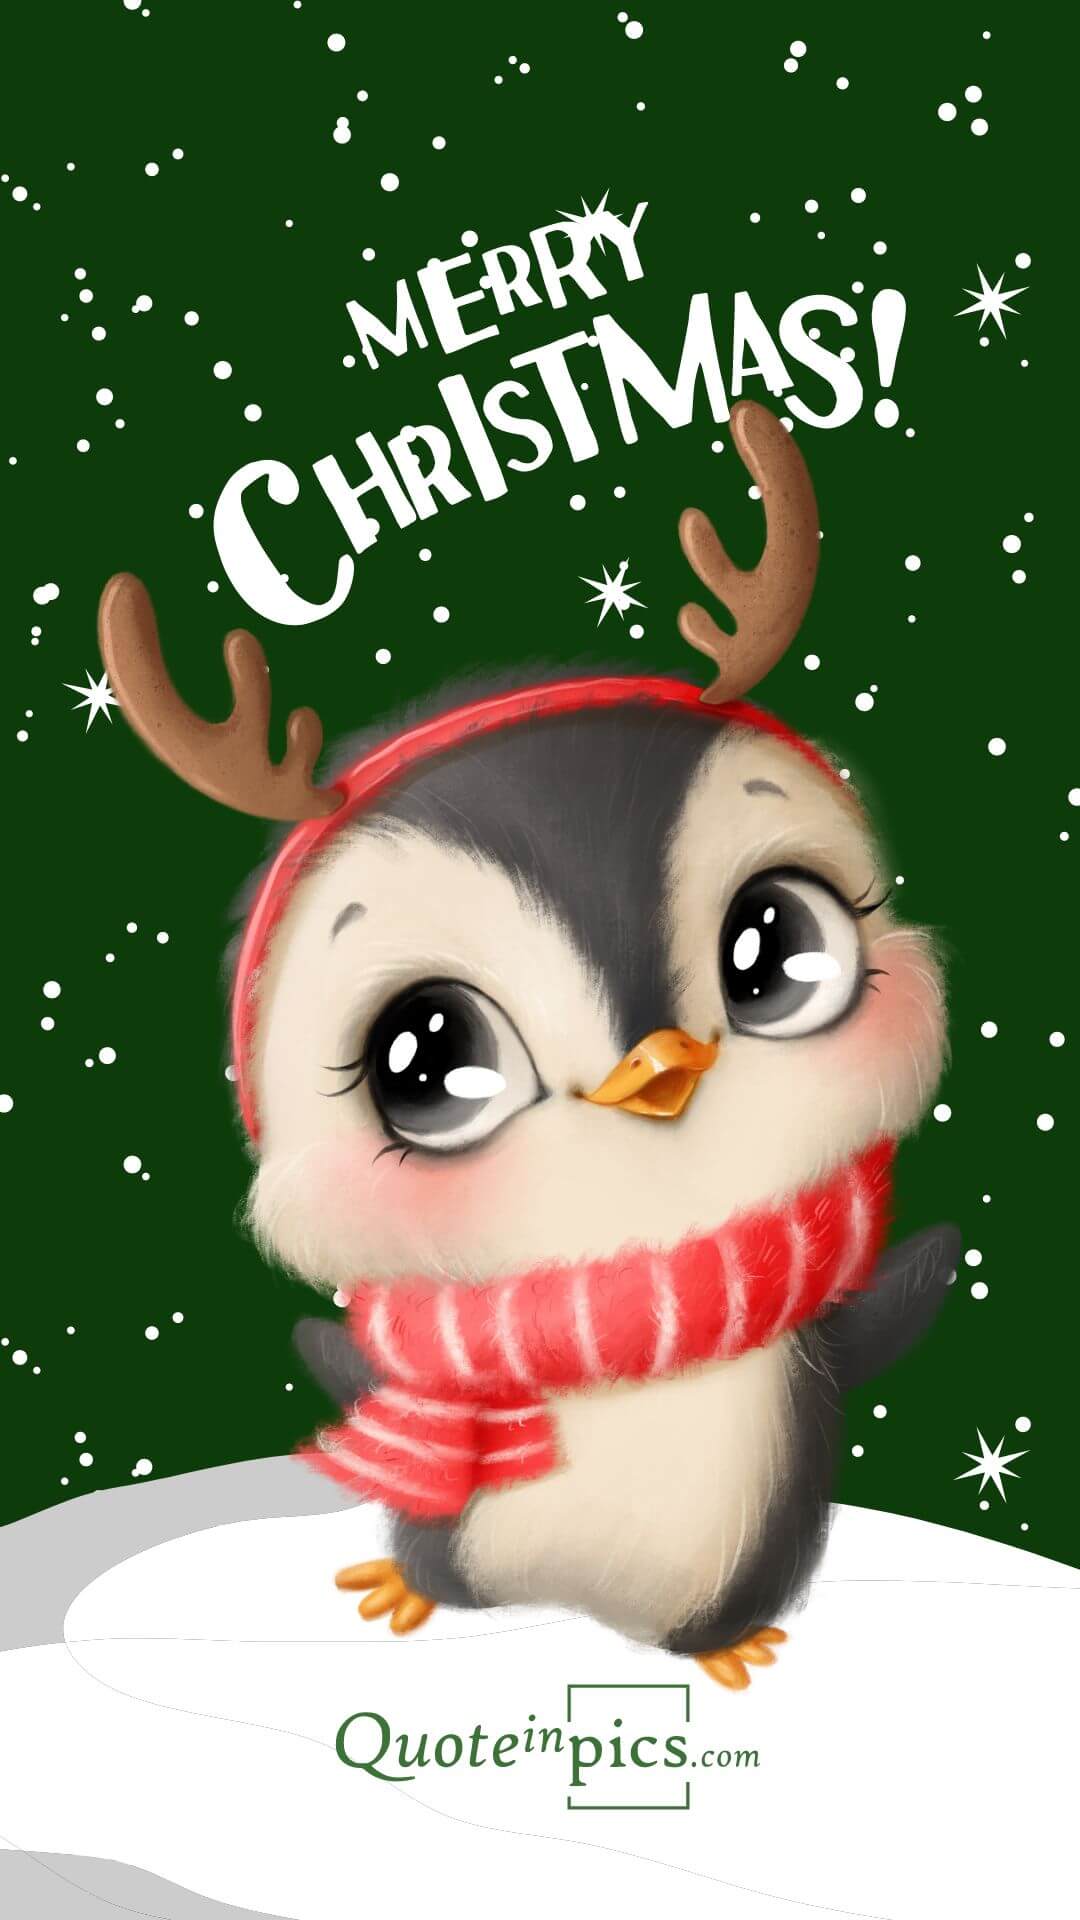 Cute pinguin saying Merry Christmas!